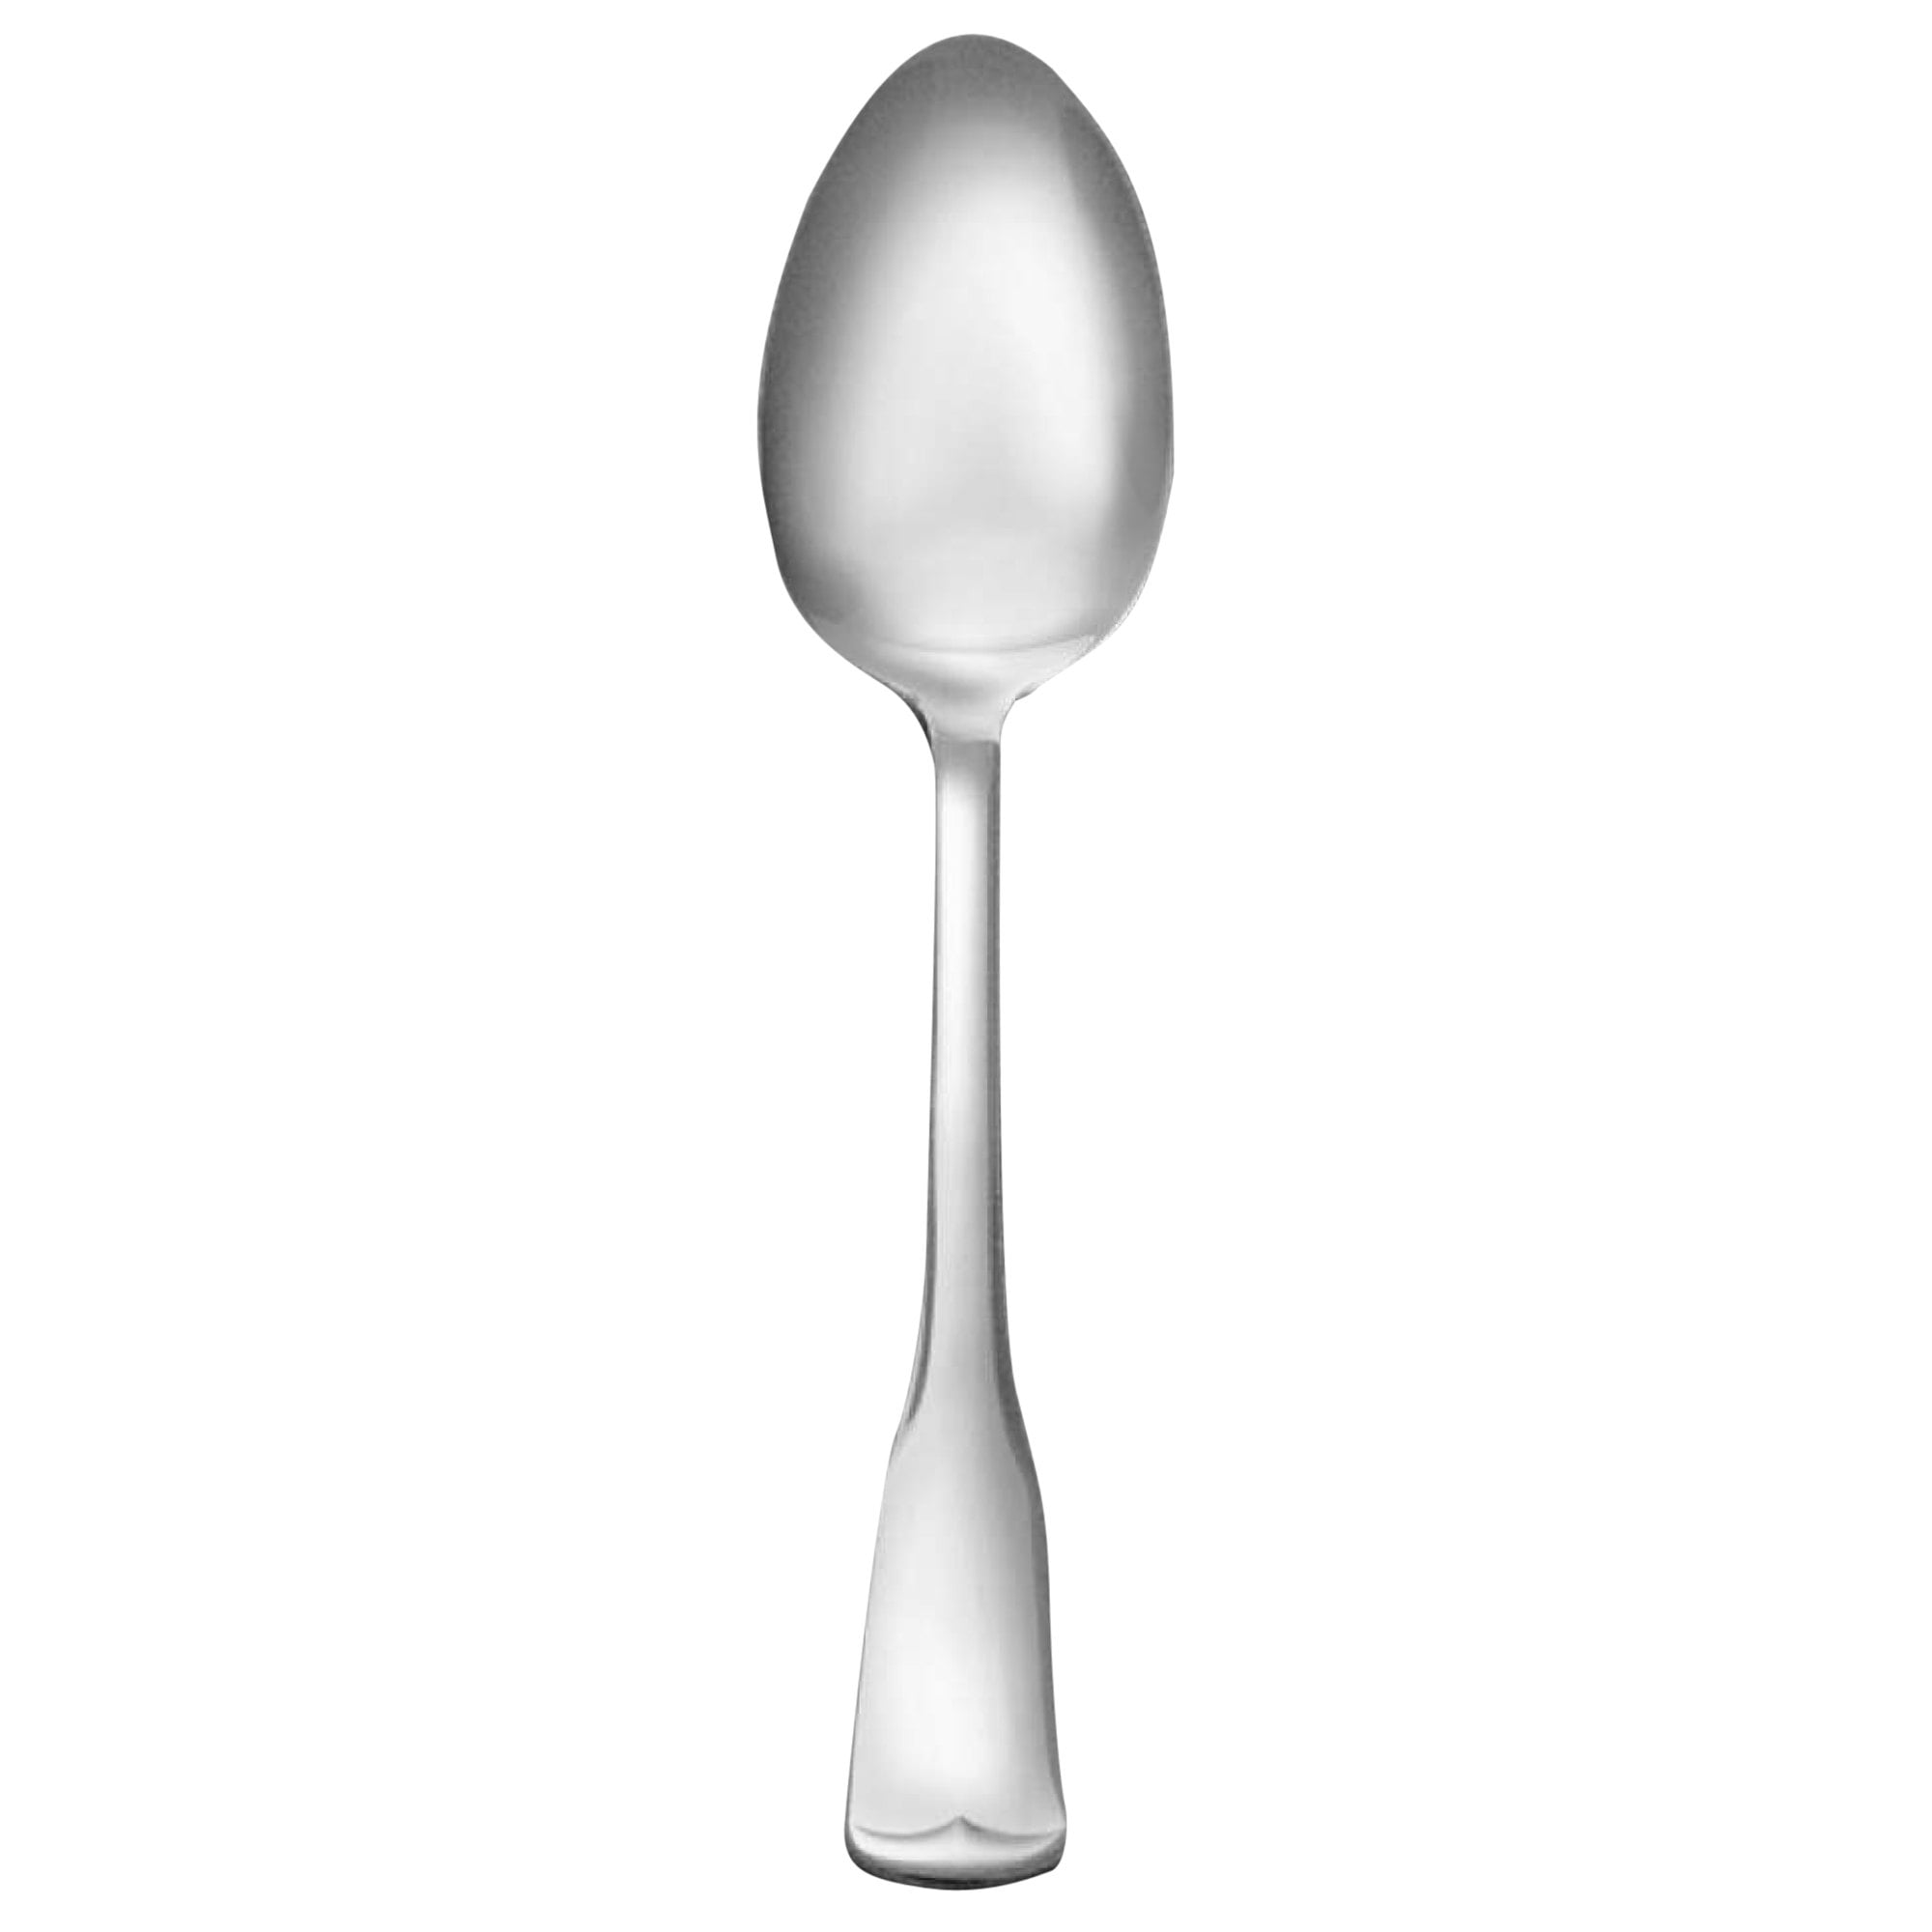 12 GENEVA BOUILLON SPOONS  HEAVY WEIGHT BY BRANDWARE FREE SHIPPING USA ONLY 